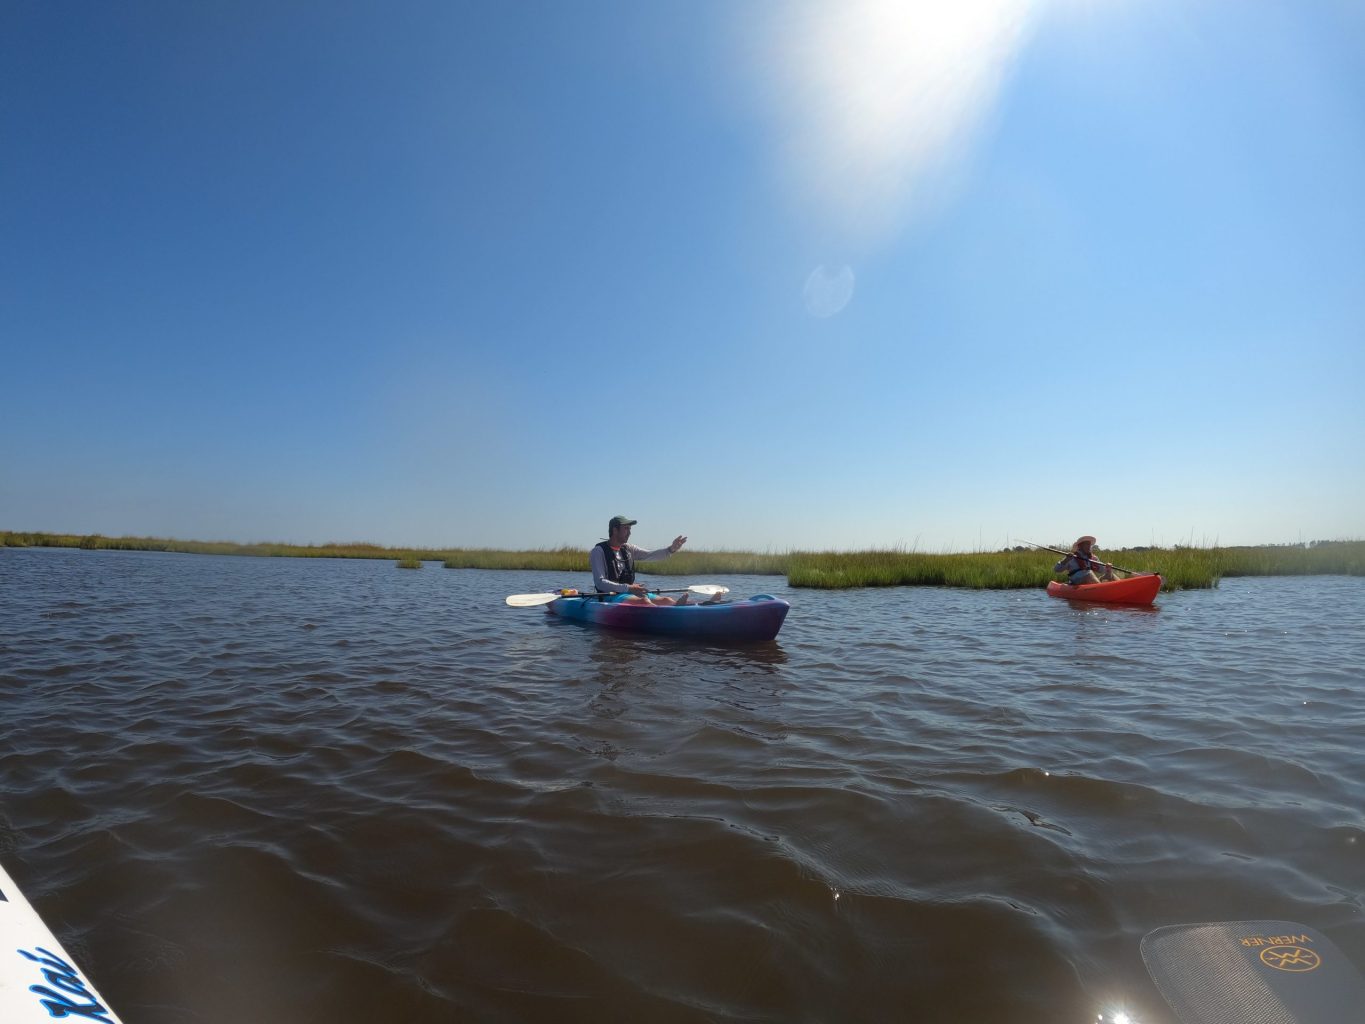 Tour guide Jack Turner in a kayak on the water of the Blackwater Nationail Wildlife Refuge